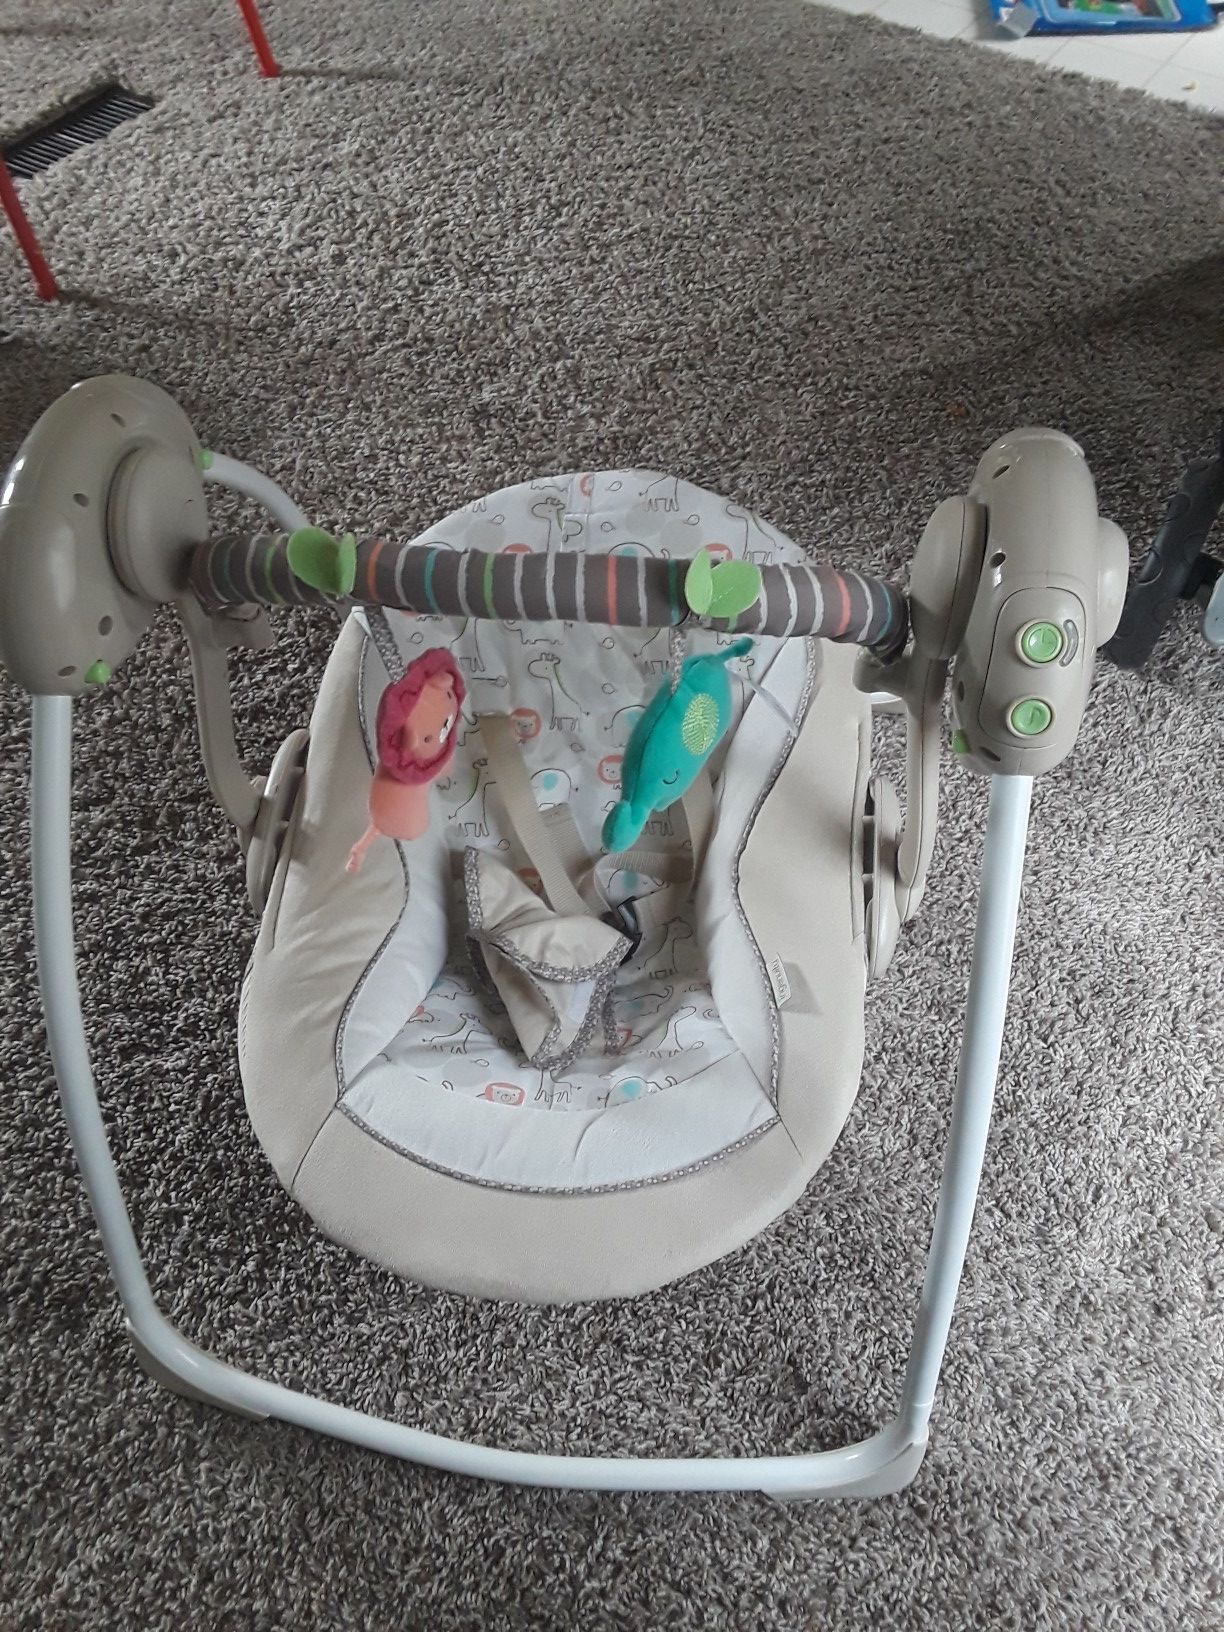 Baby swing sings and moves with batteries C. It is very relaxing for your baby.